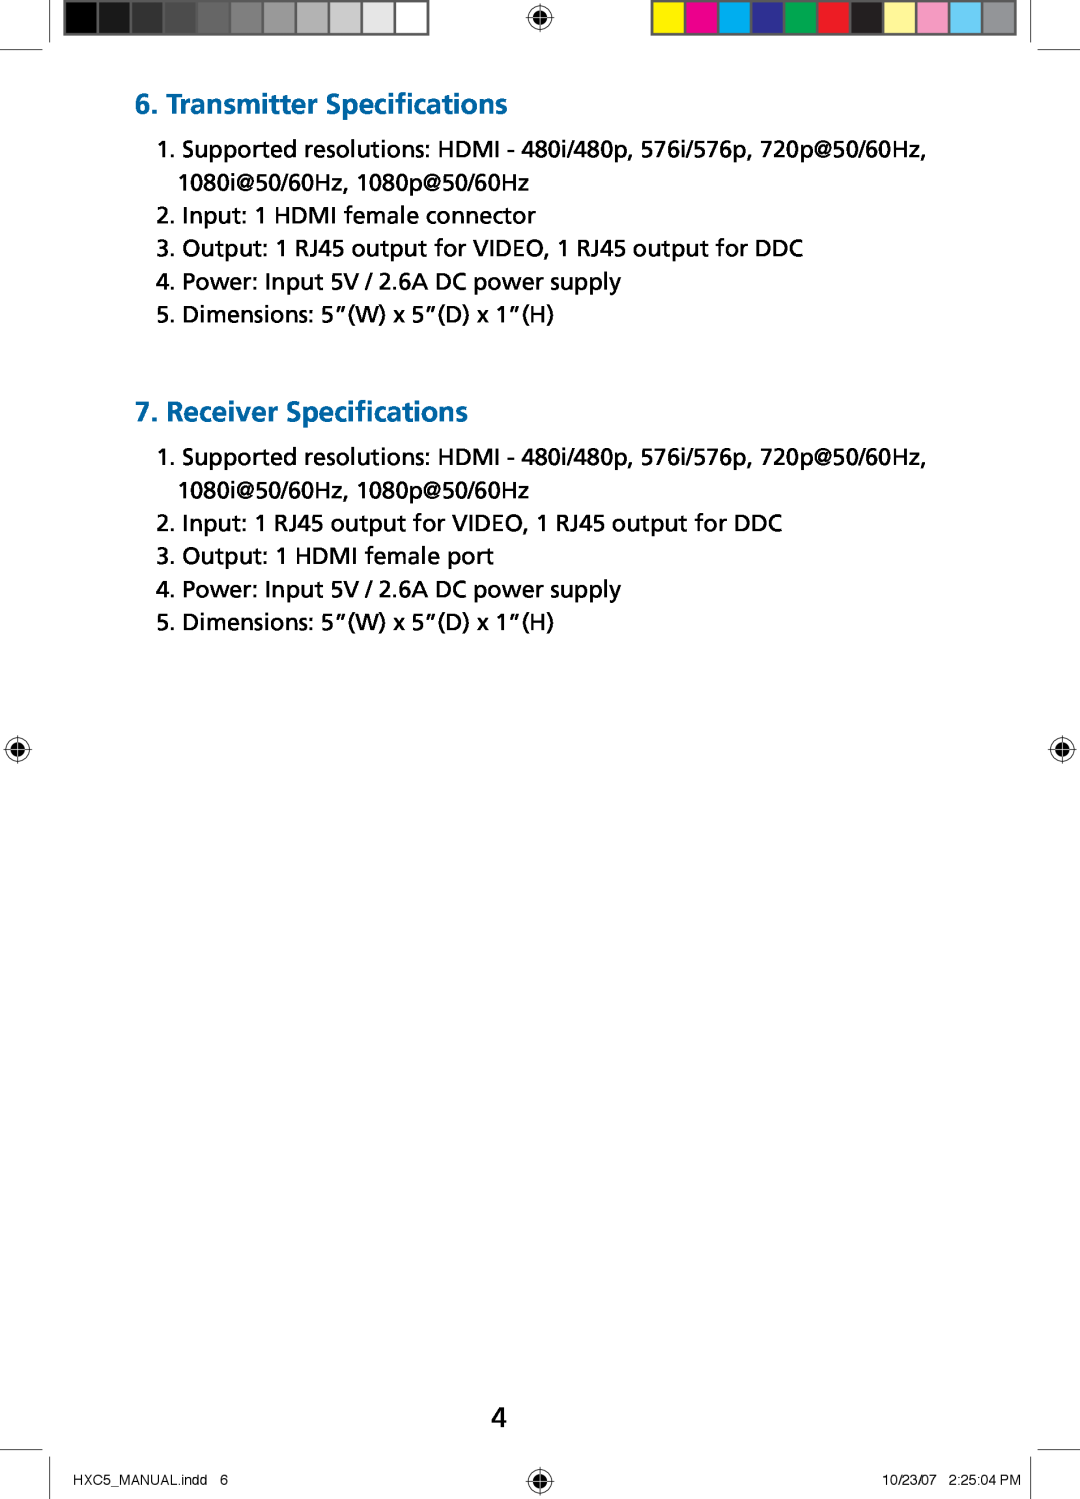 Tributaries HXC5 manual Transmitter Specifications, Receiver Specifications 